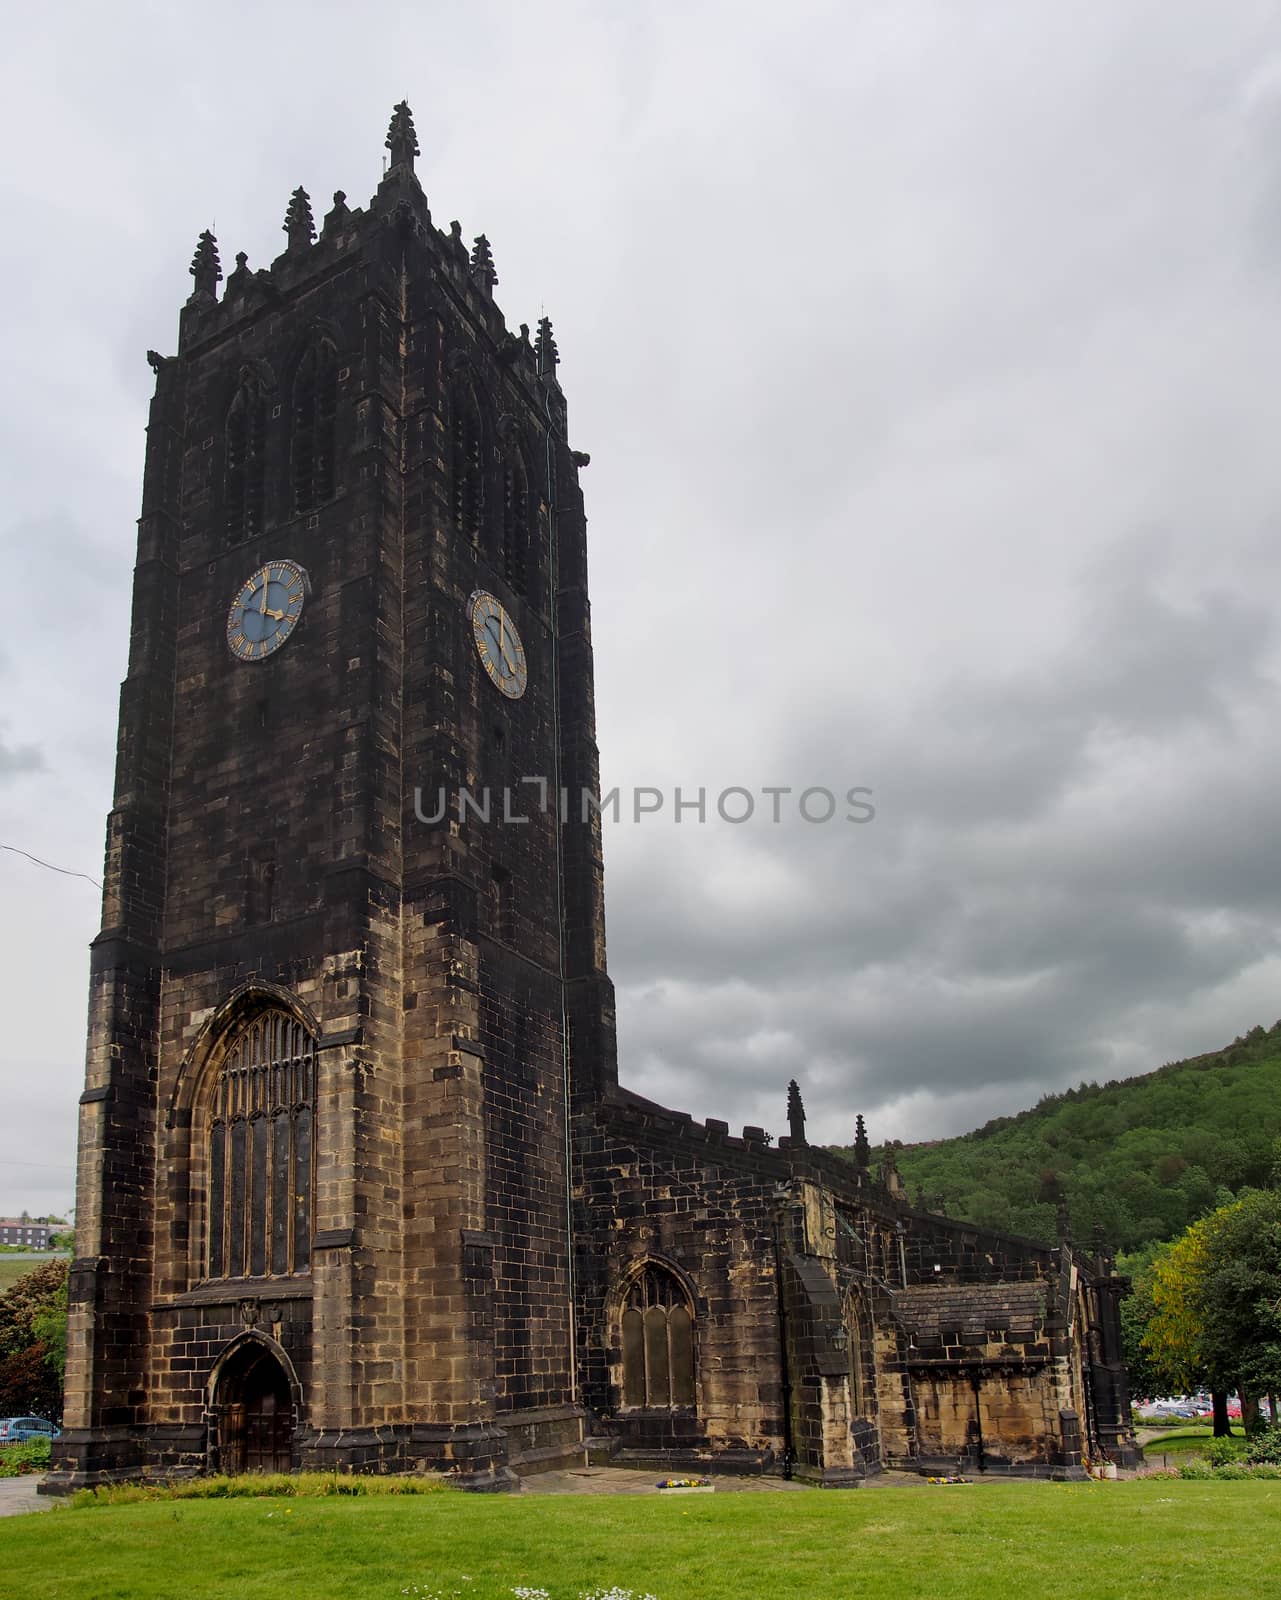 halifax minster in west yorkshire a medieval church formerly a parish known as saint john the baptist completed in 1438